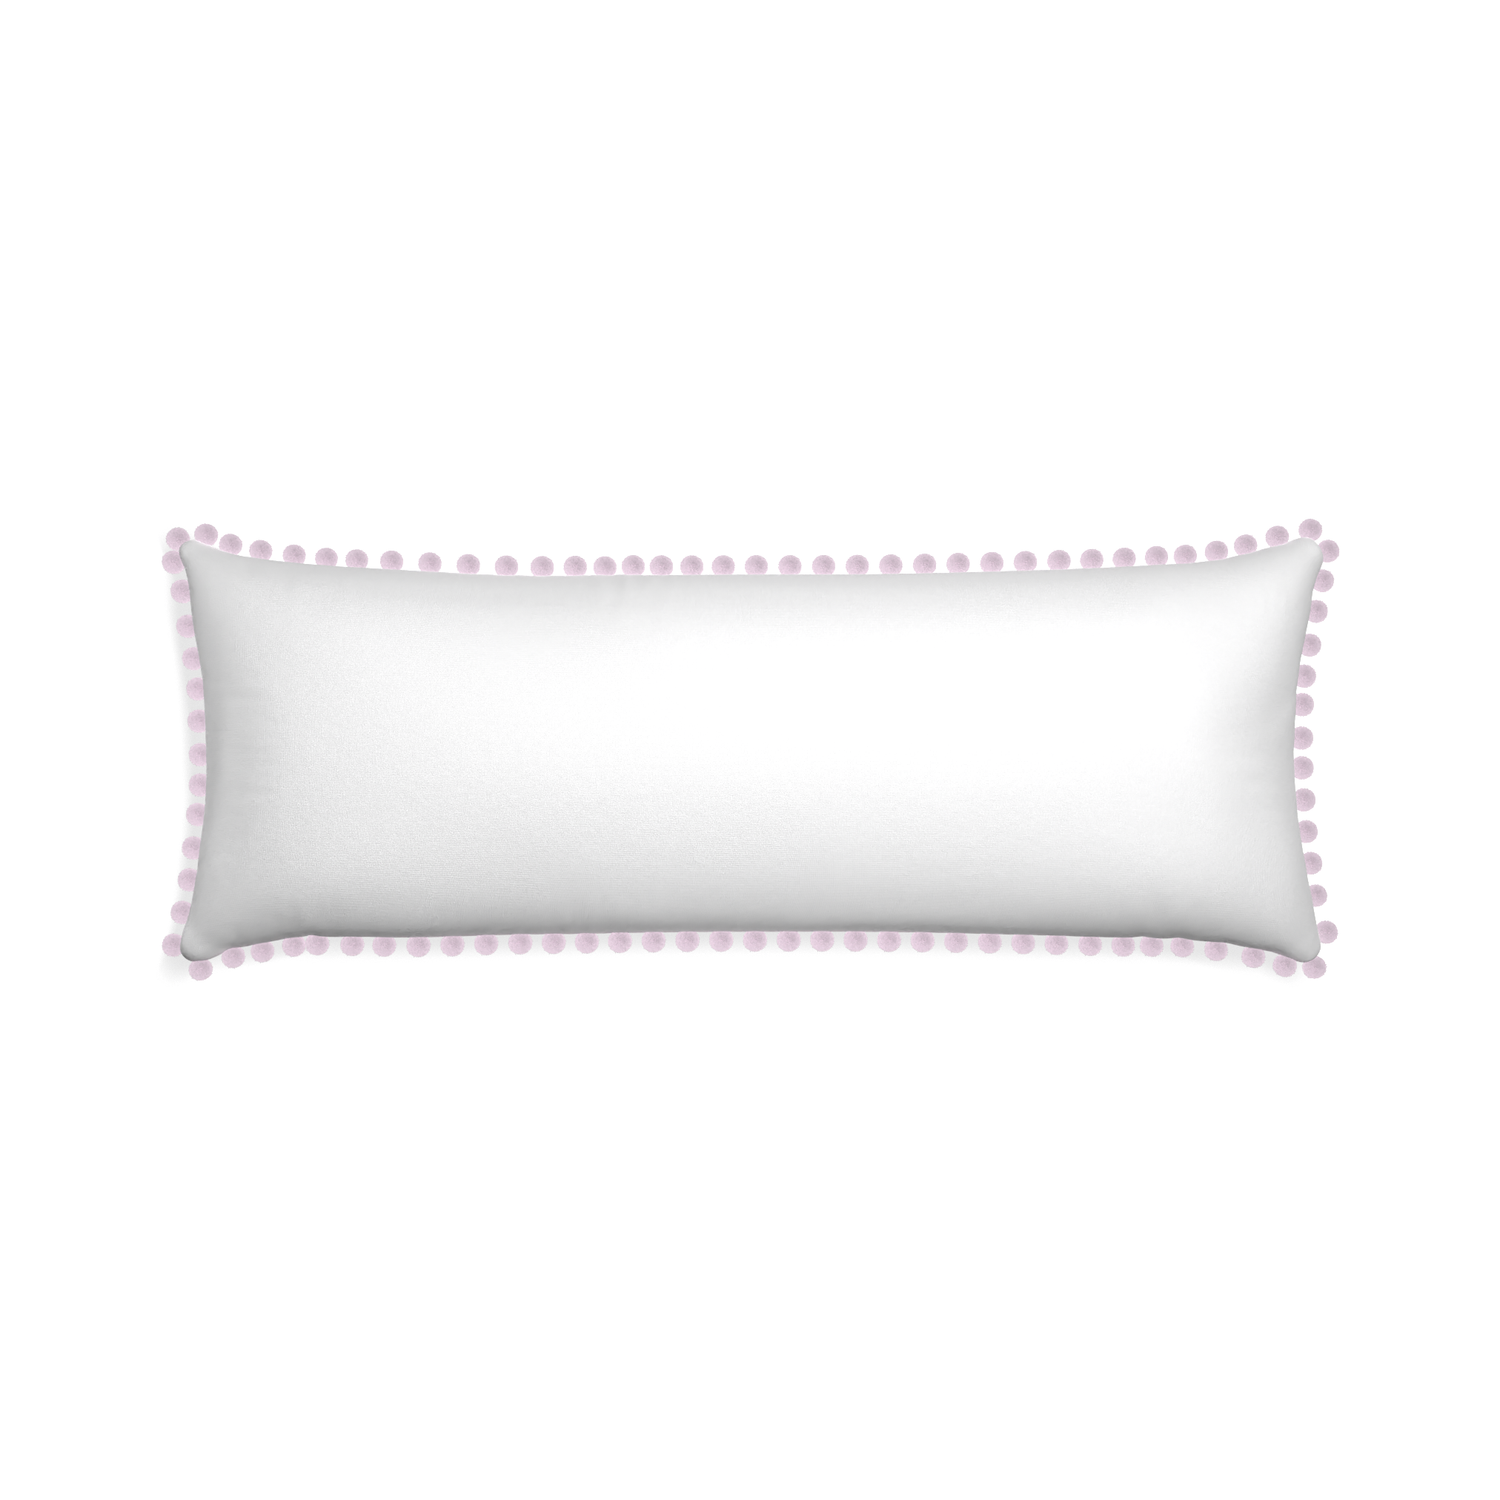 Xl-lumbar snow custom white cottonpillow with l on white background